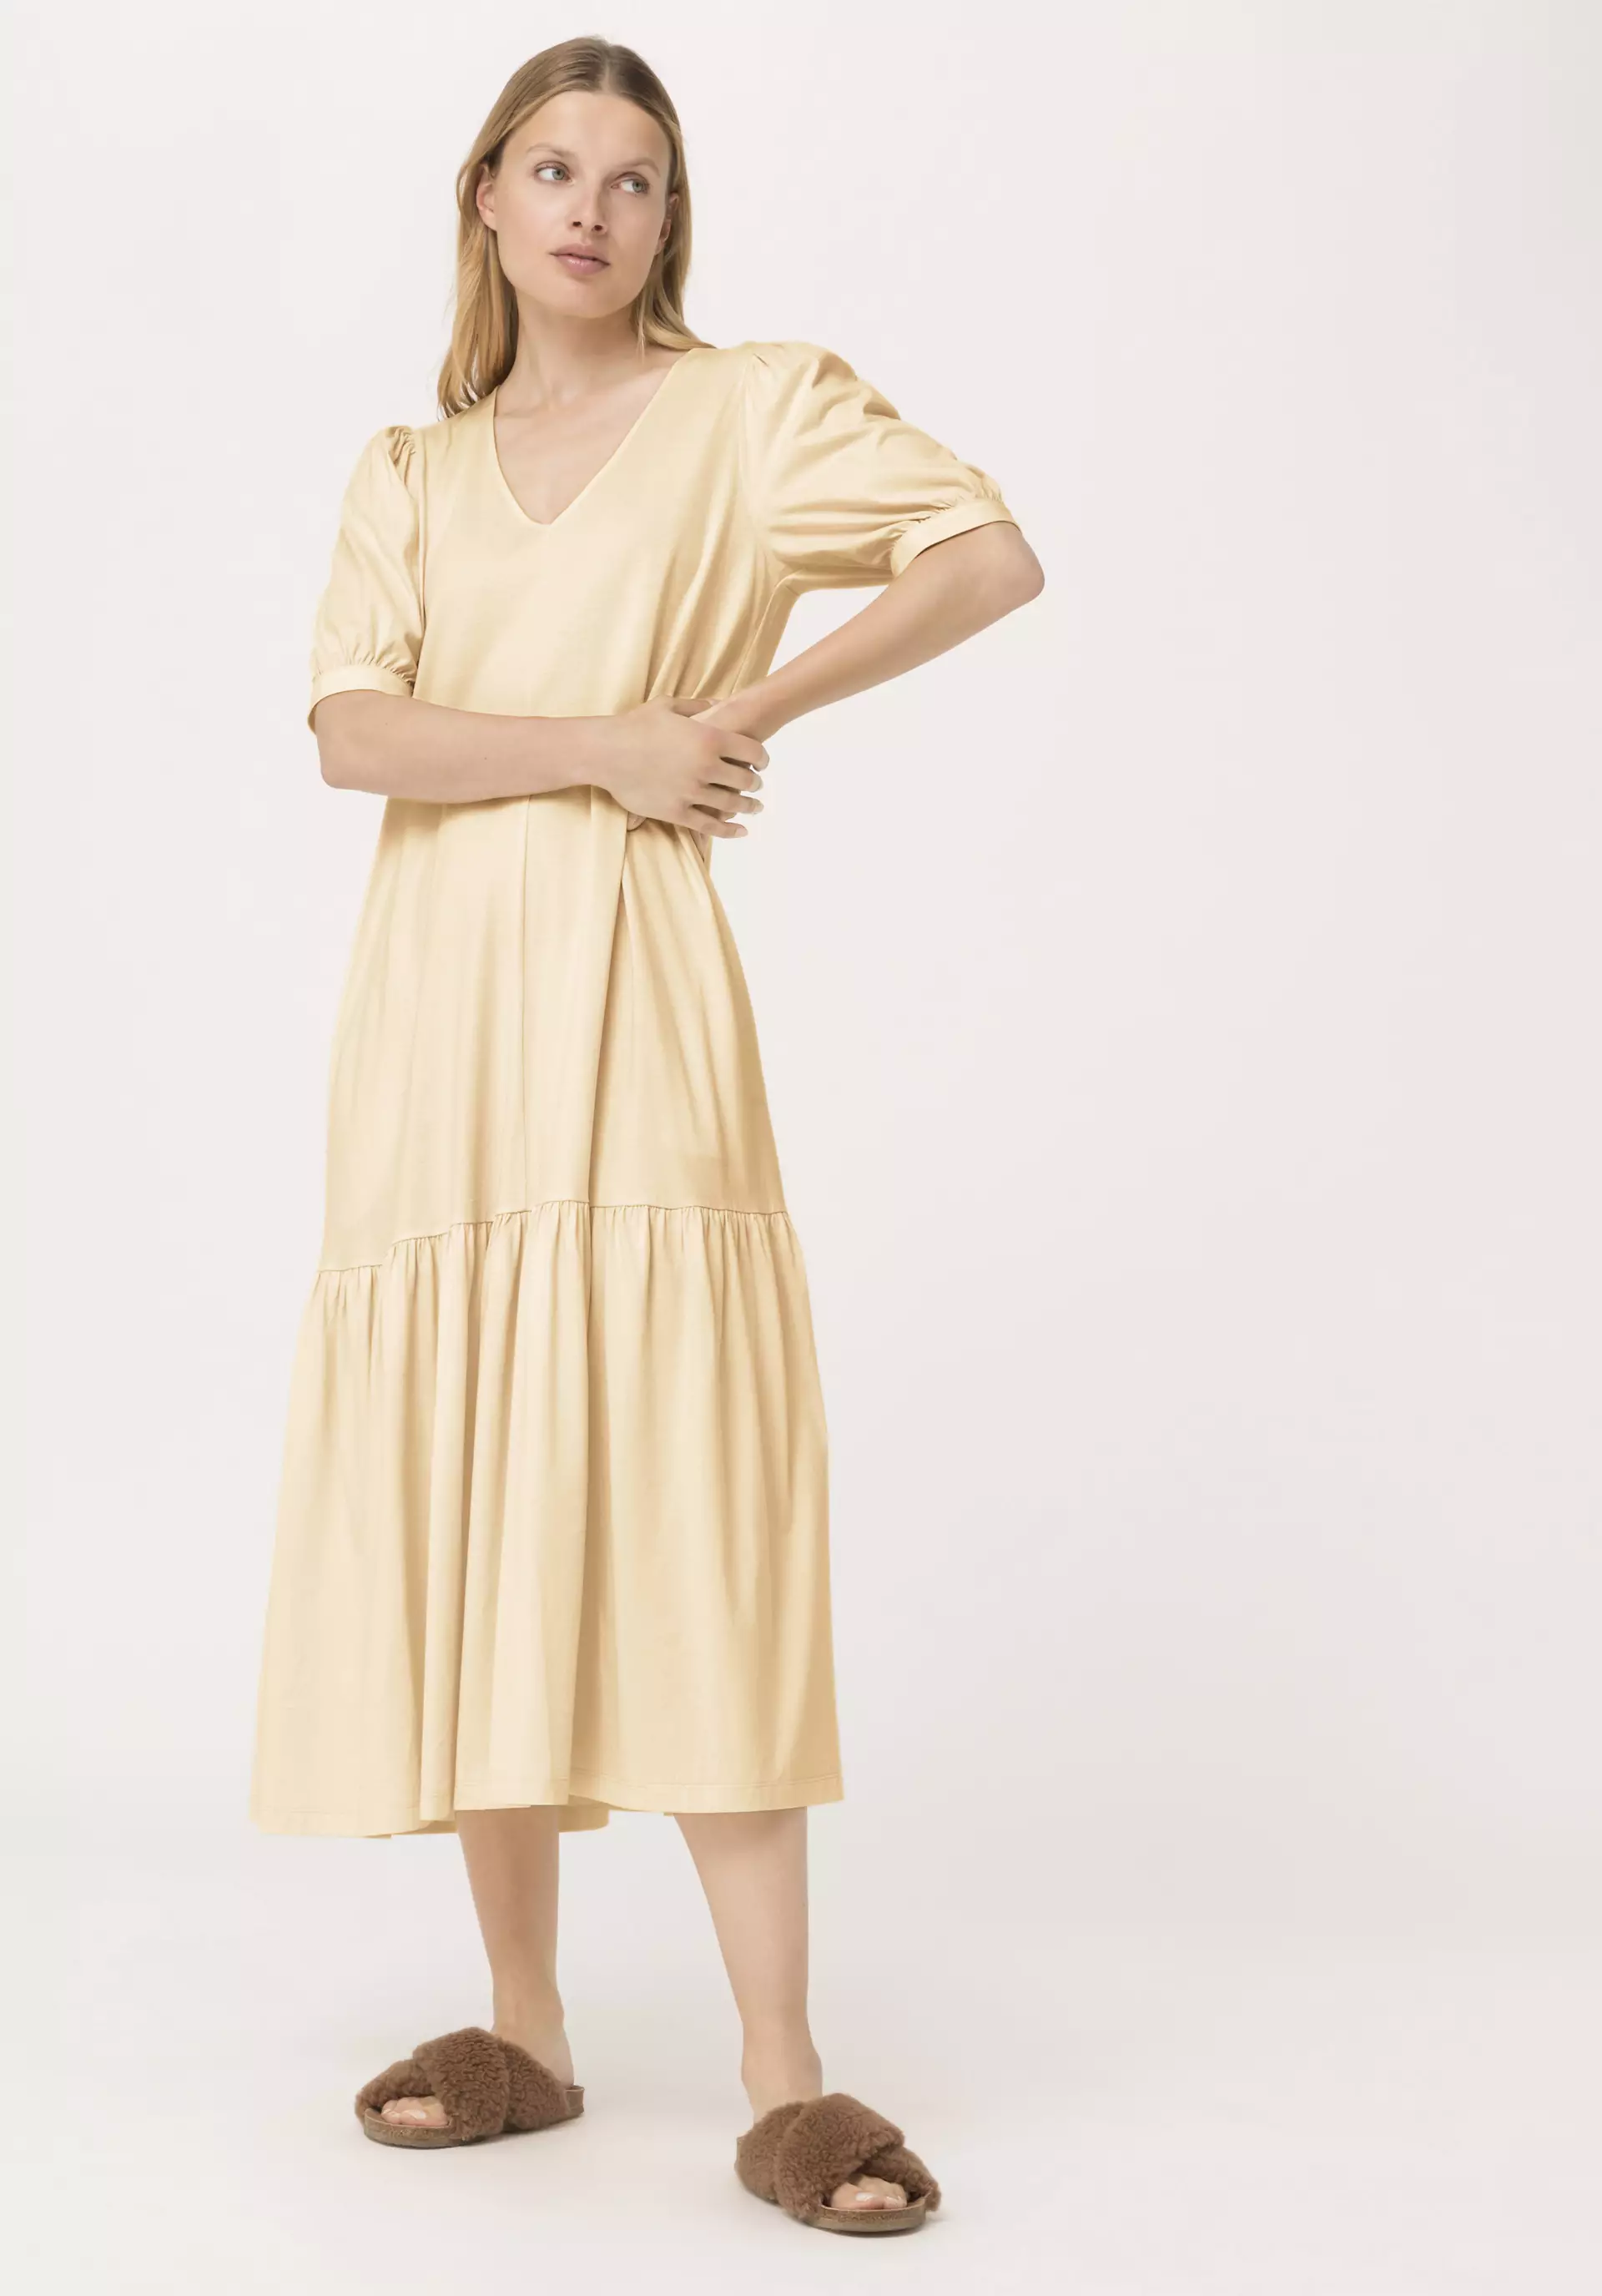 Jersey dress made from pure organic cotton - 2